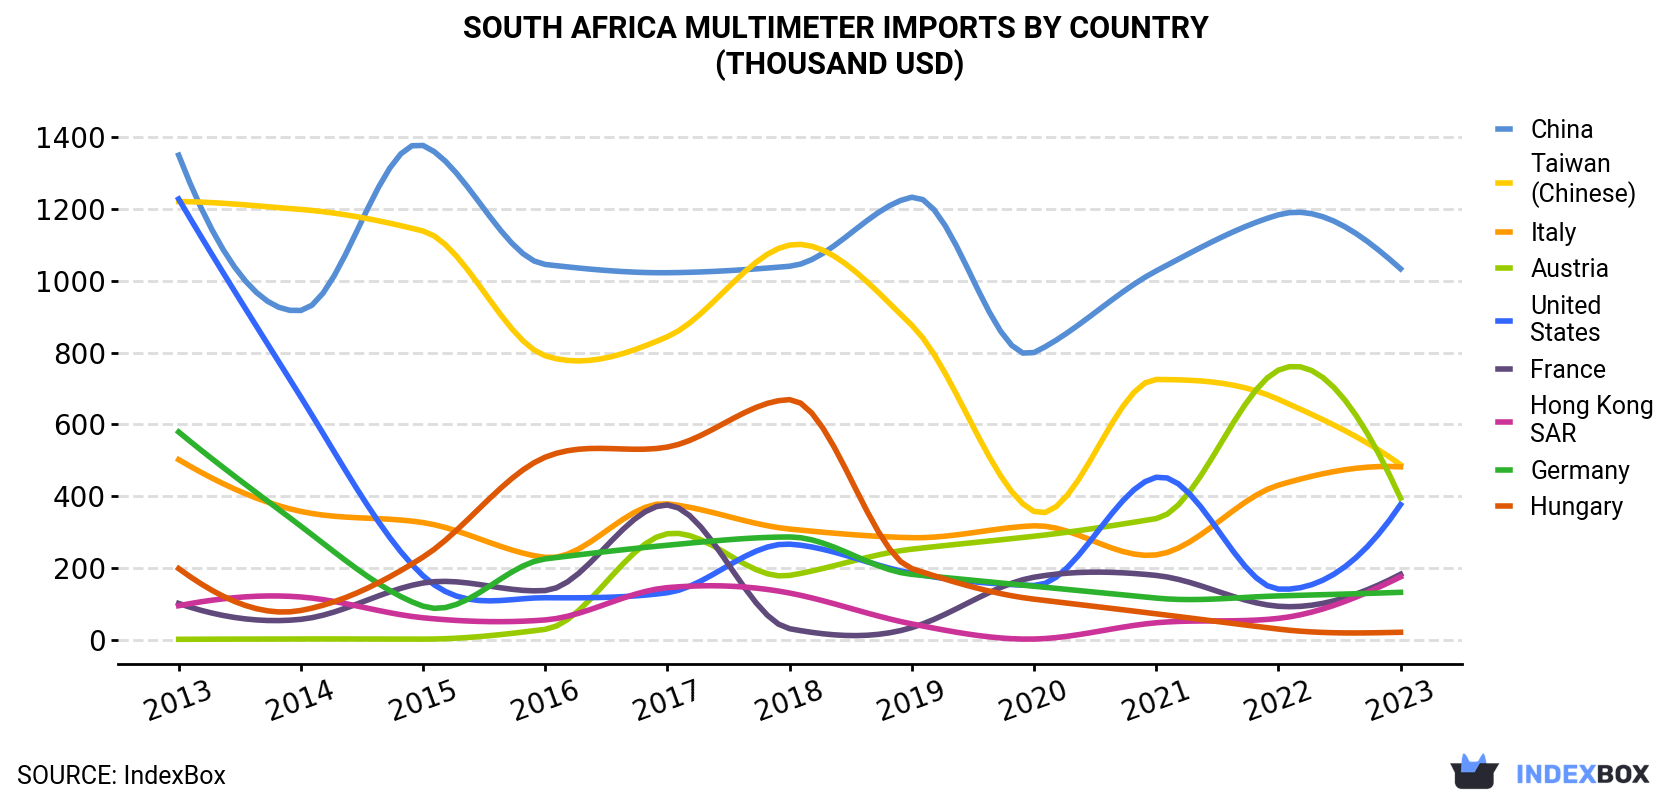 South Africa Multimeter Imports By Country (Thousand USD)